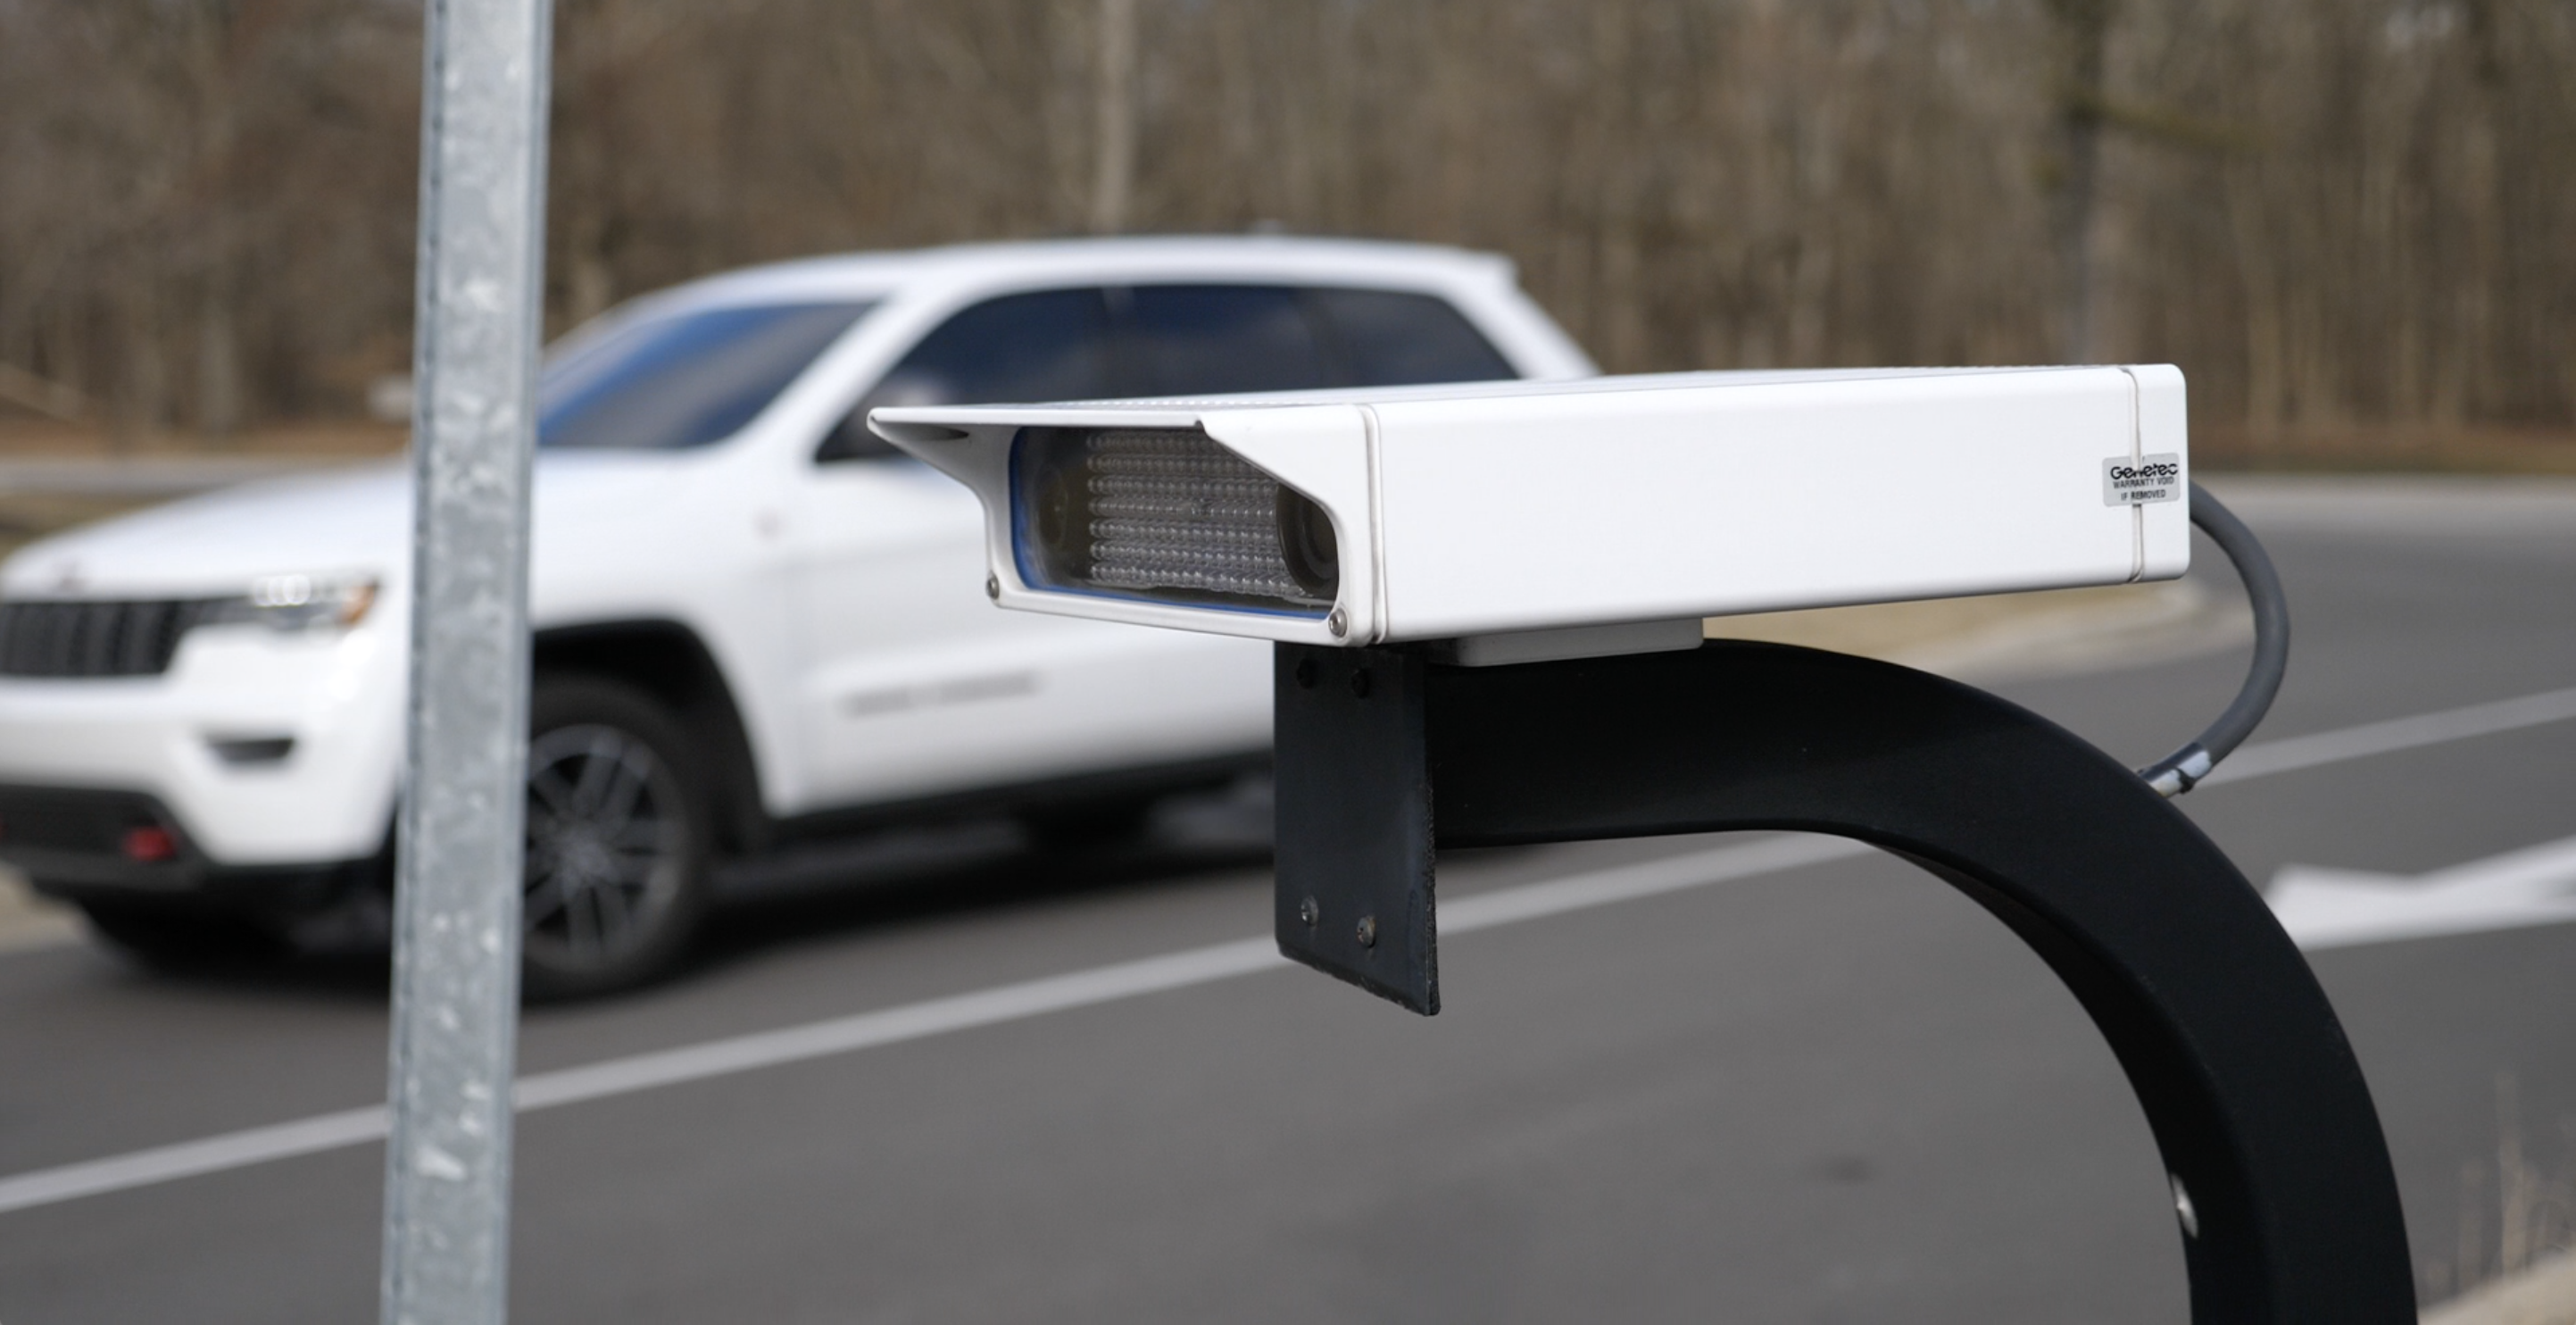 License plate recognition camera mounted on roadside.